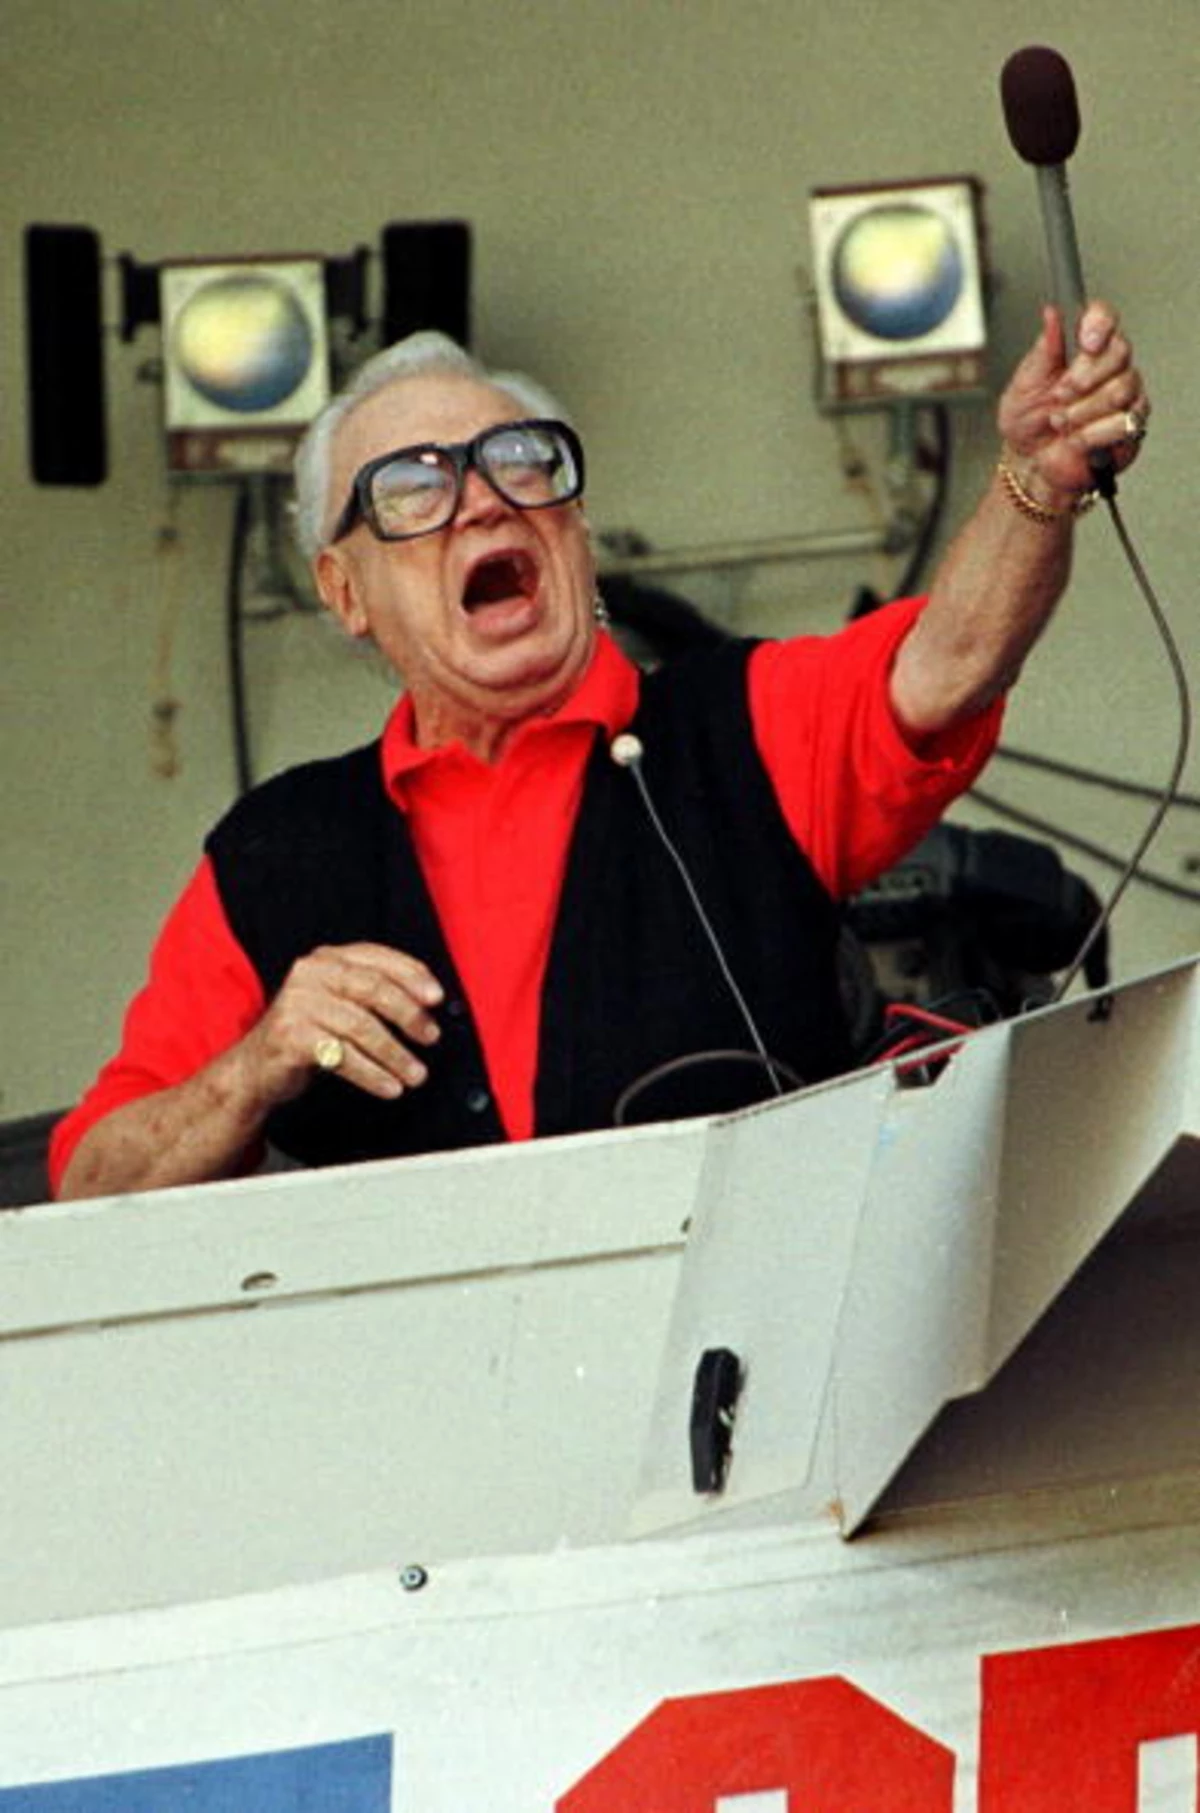 Cubs Fans Are Doing What to Harry Caray's Grave?